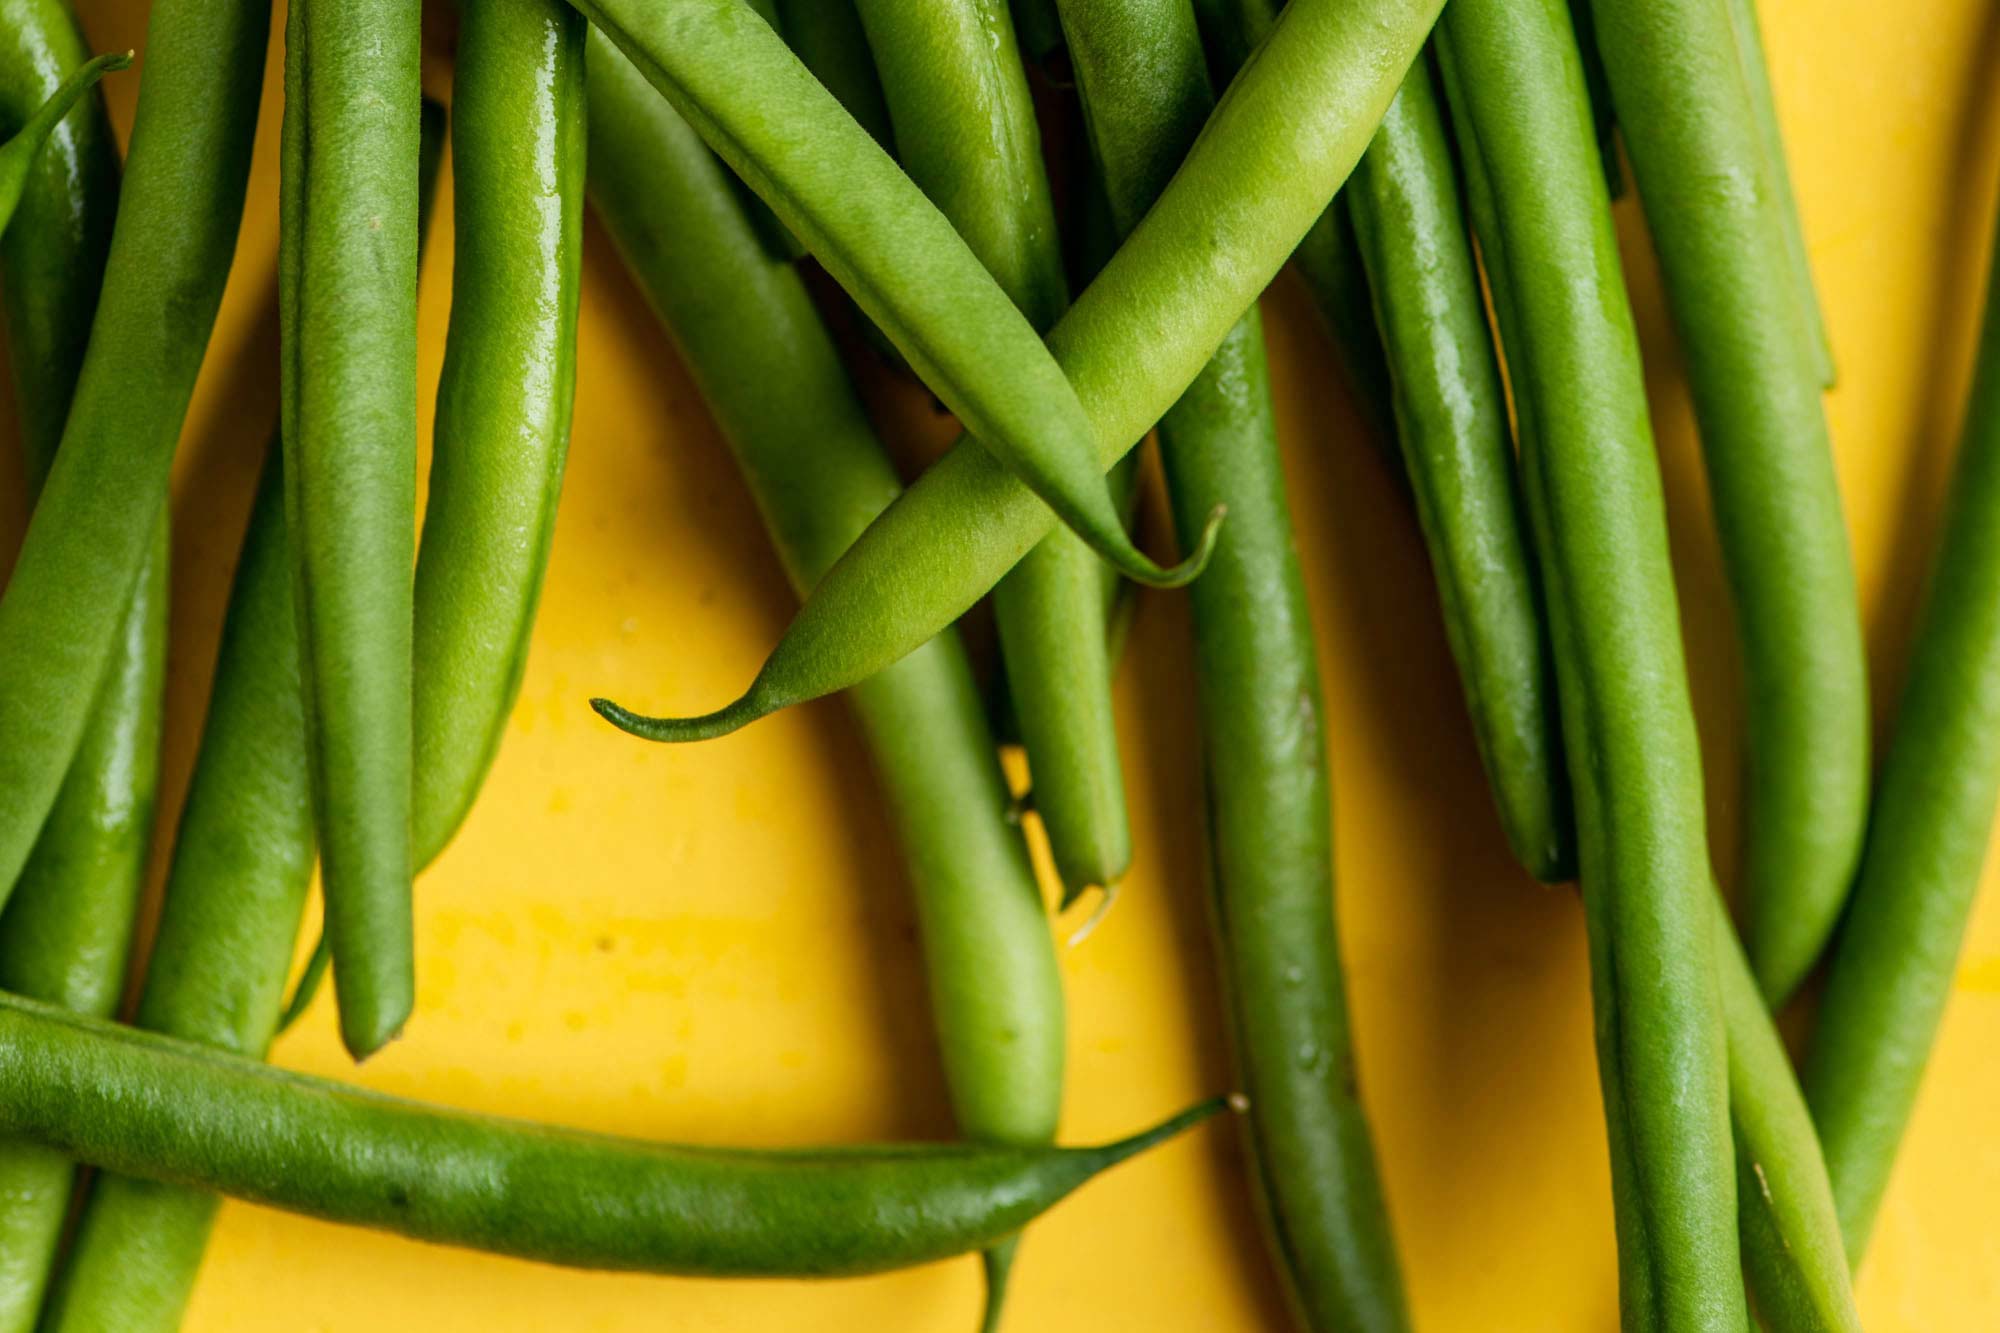 Whole Haricot Verts on a yellow surface.